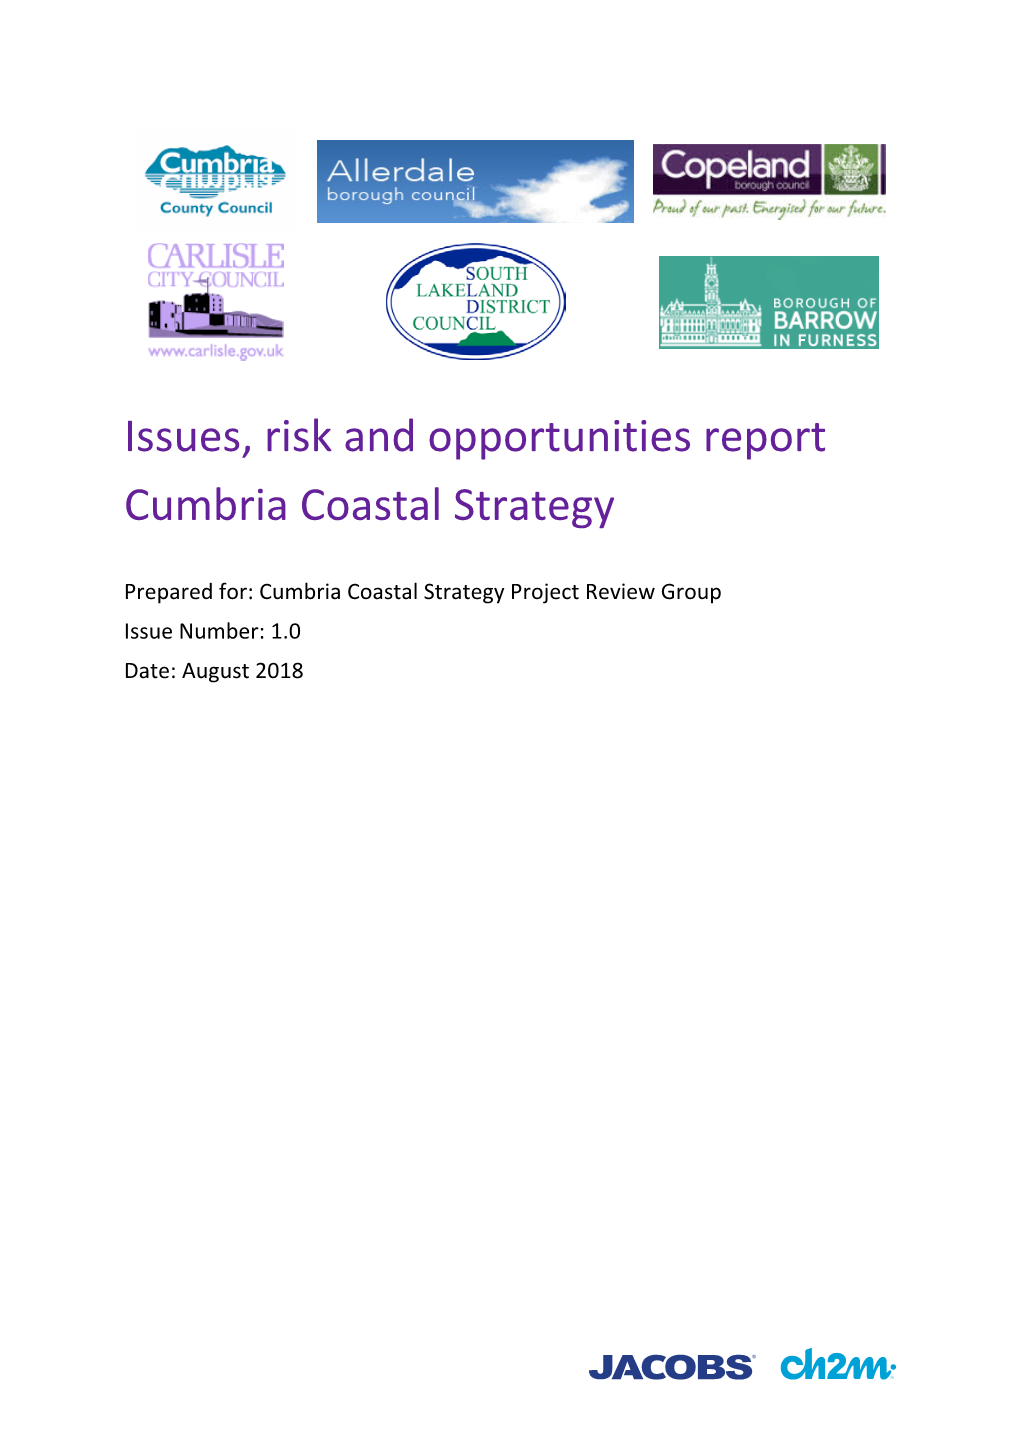 Issues, Risk and Opportunities Report Cumbria Coastal Strategy